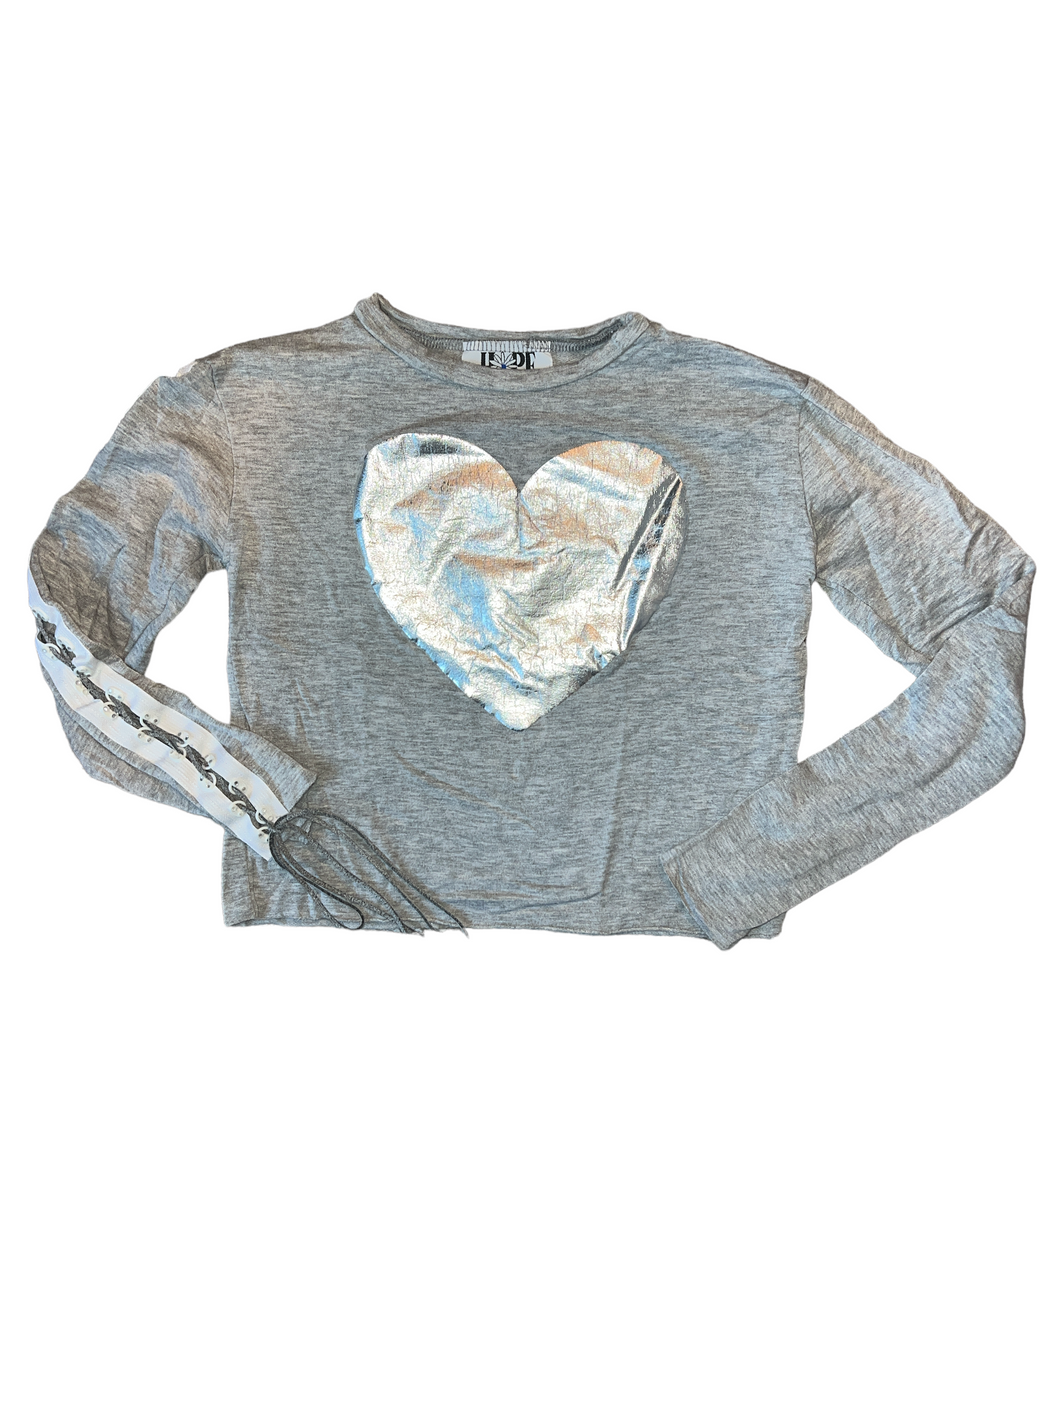 Hope Jeans girls lace up sleeve silver heart top 6